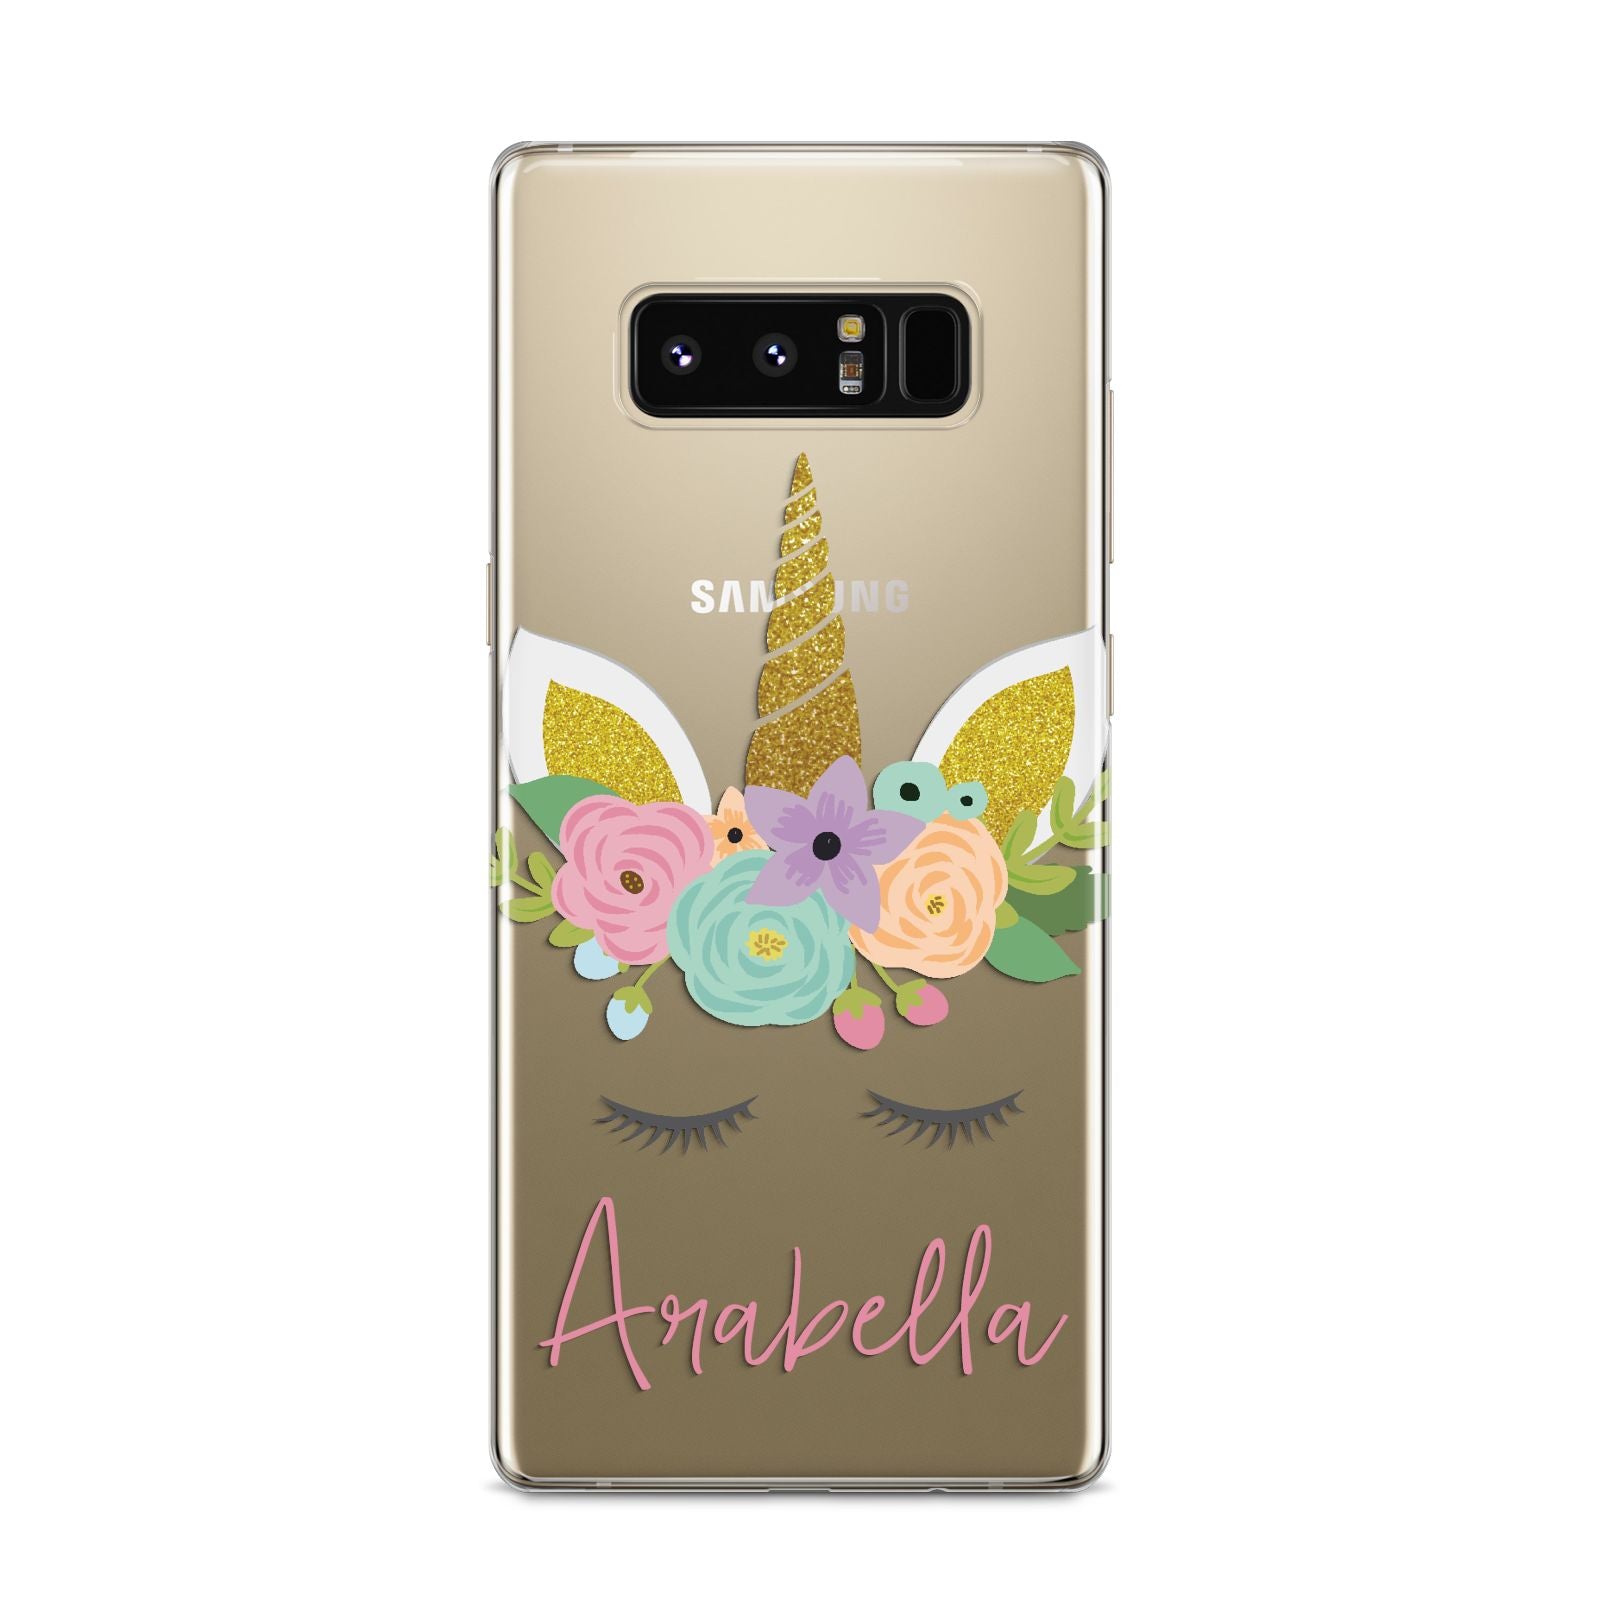 Personalised Unicorn Face Samsung Galaxy S8 Case